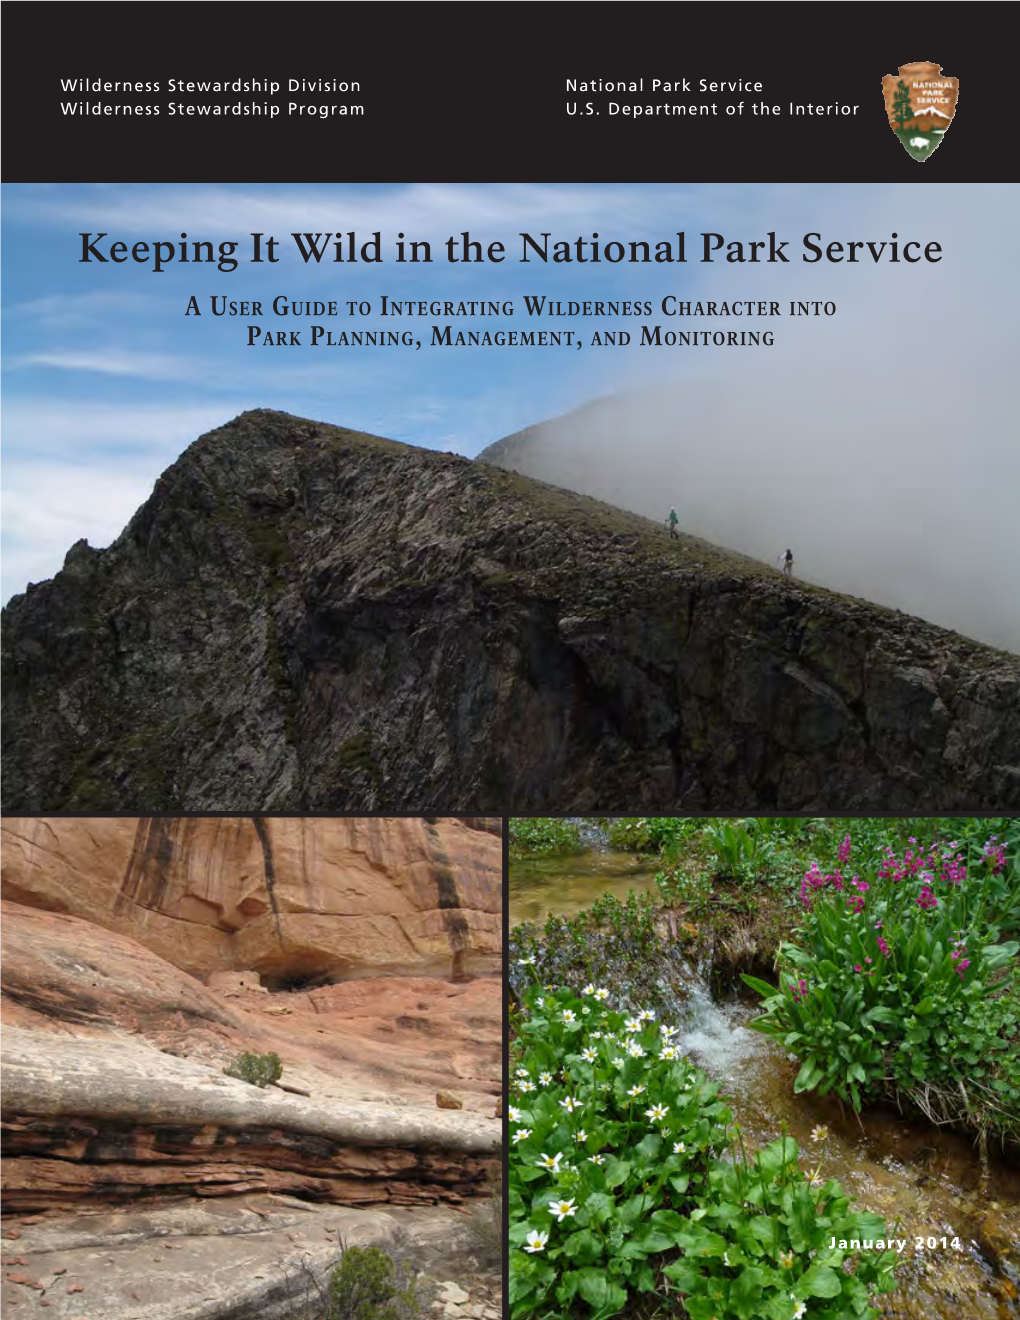 Keeping It Wild in the National Park Service, a User Guide to Integrating